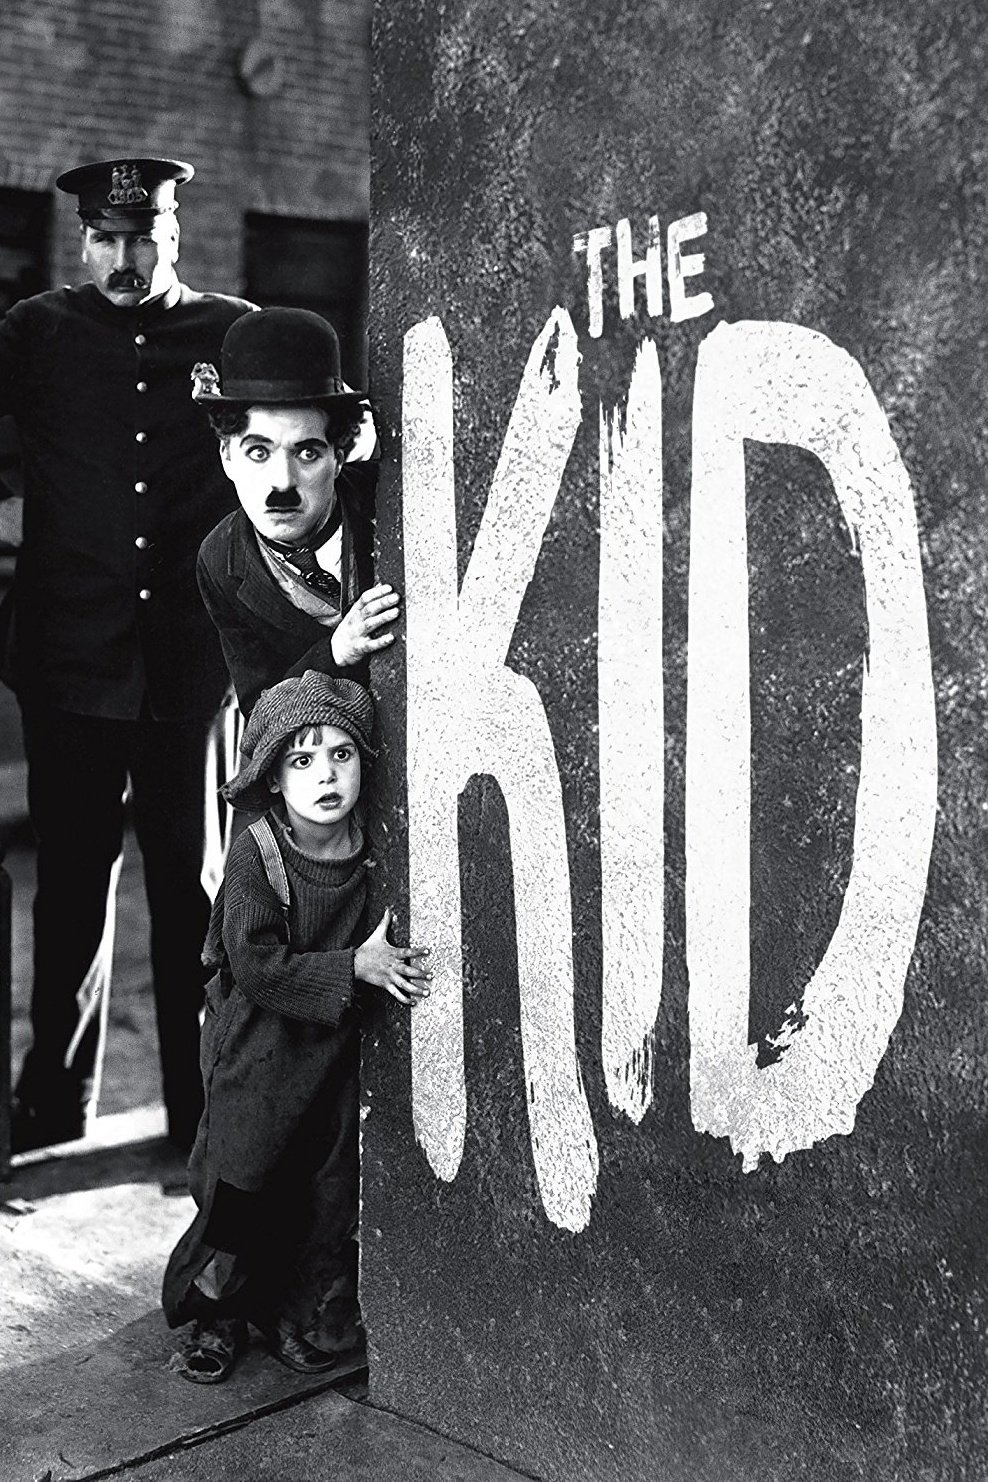 Poster for the movie "The Kid"